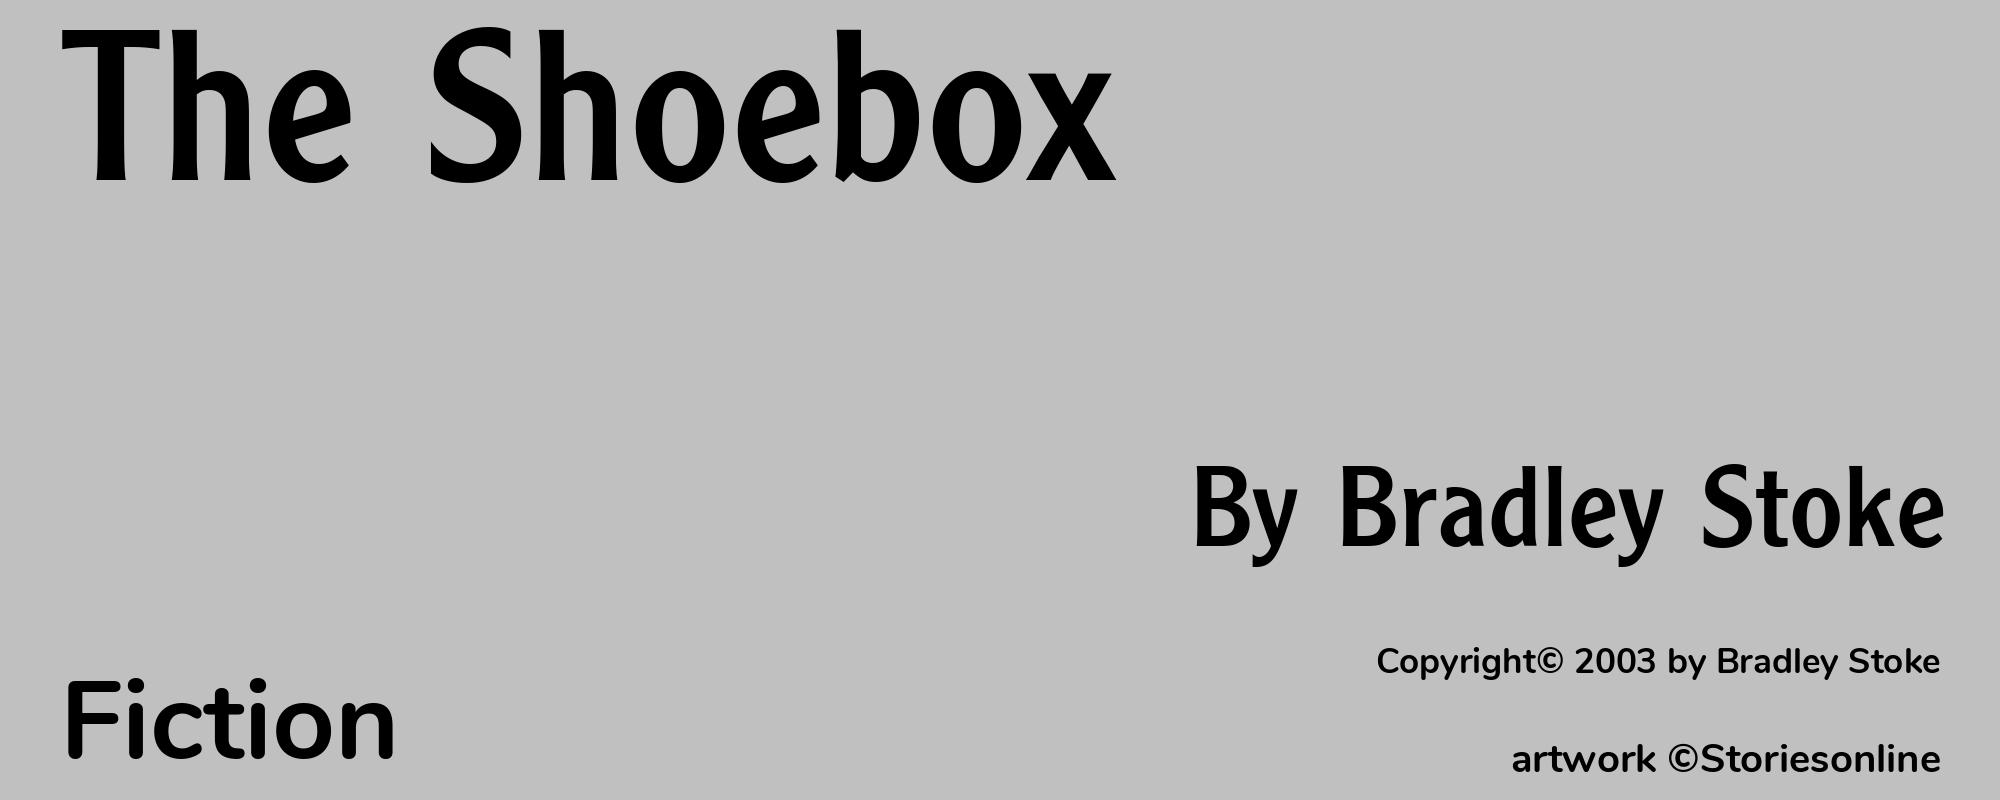 The Shoebox - Cover